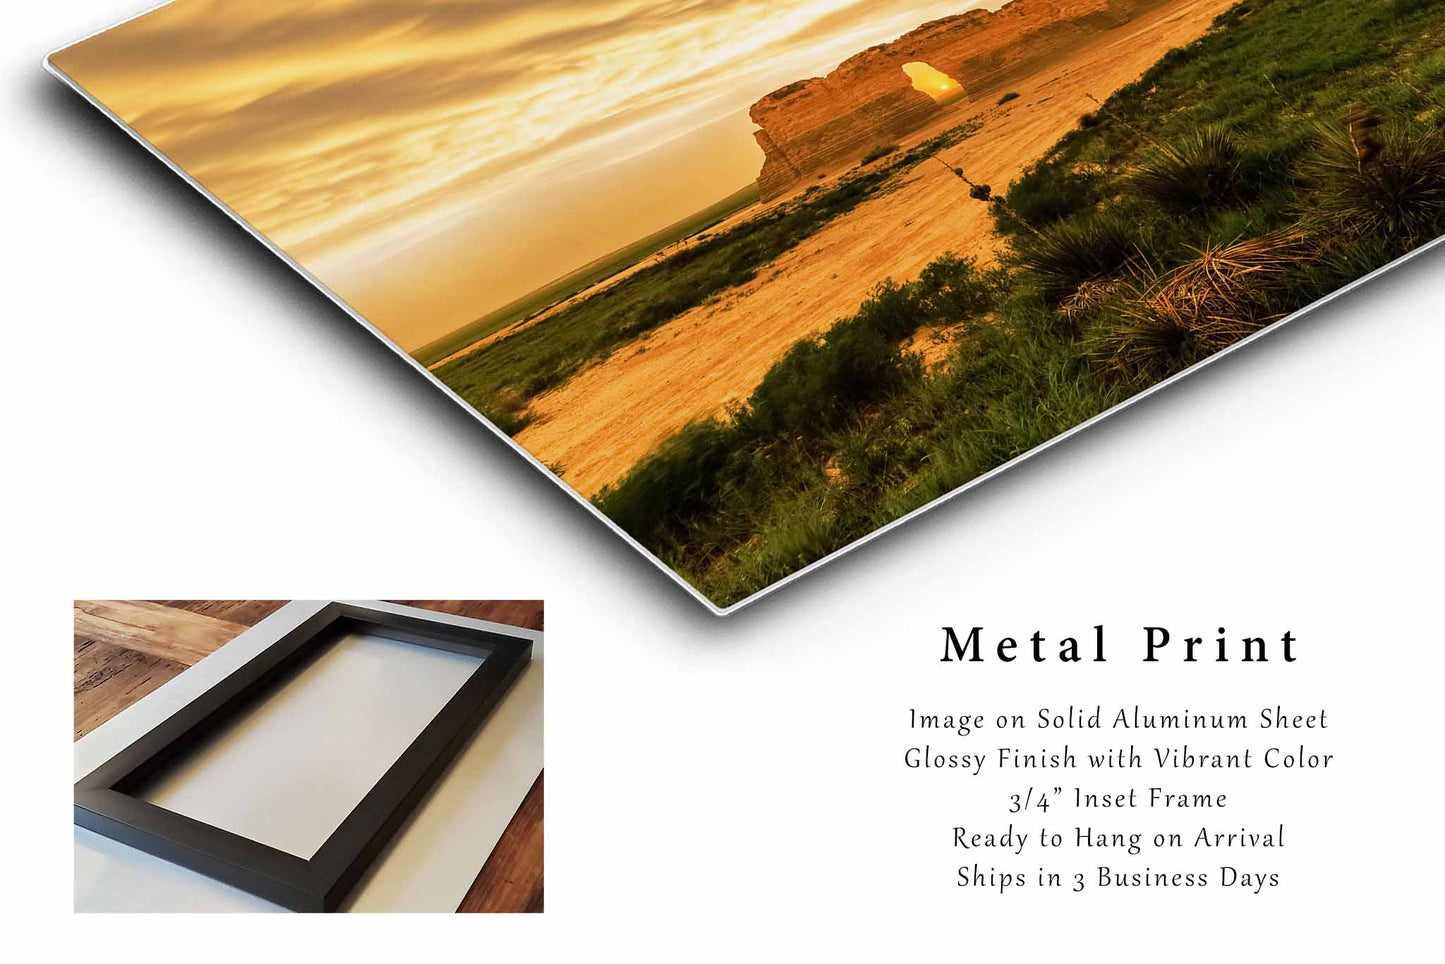 Great Plains Metal Print (Ready to Hang) Photo on Aluminum of Monument Rocks Under Stormy Sky at Sunset in Kansas Prairie Wall Art Western Decor